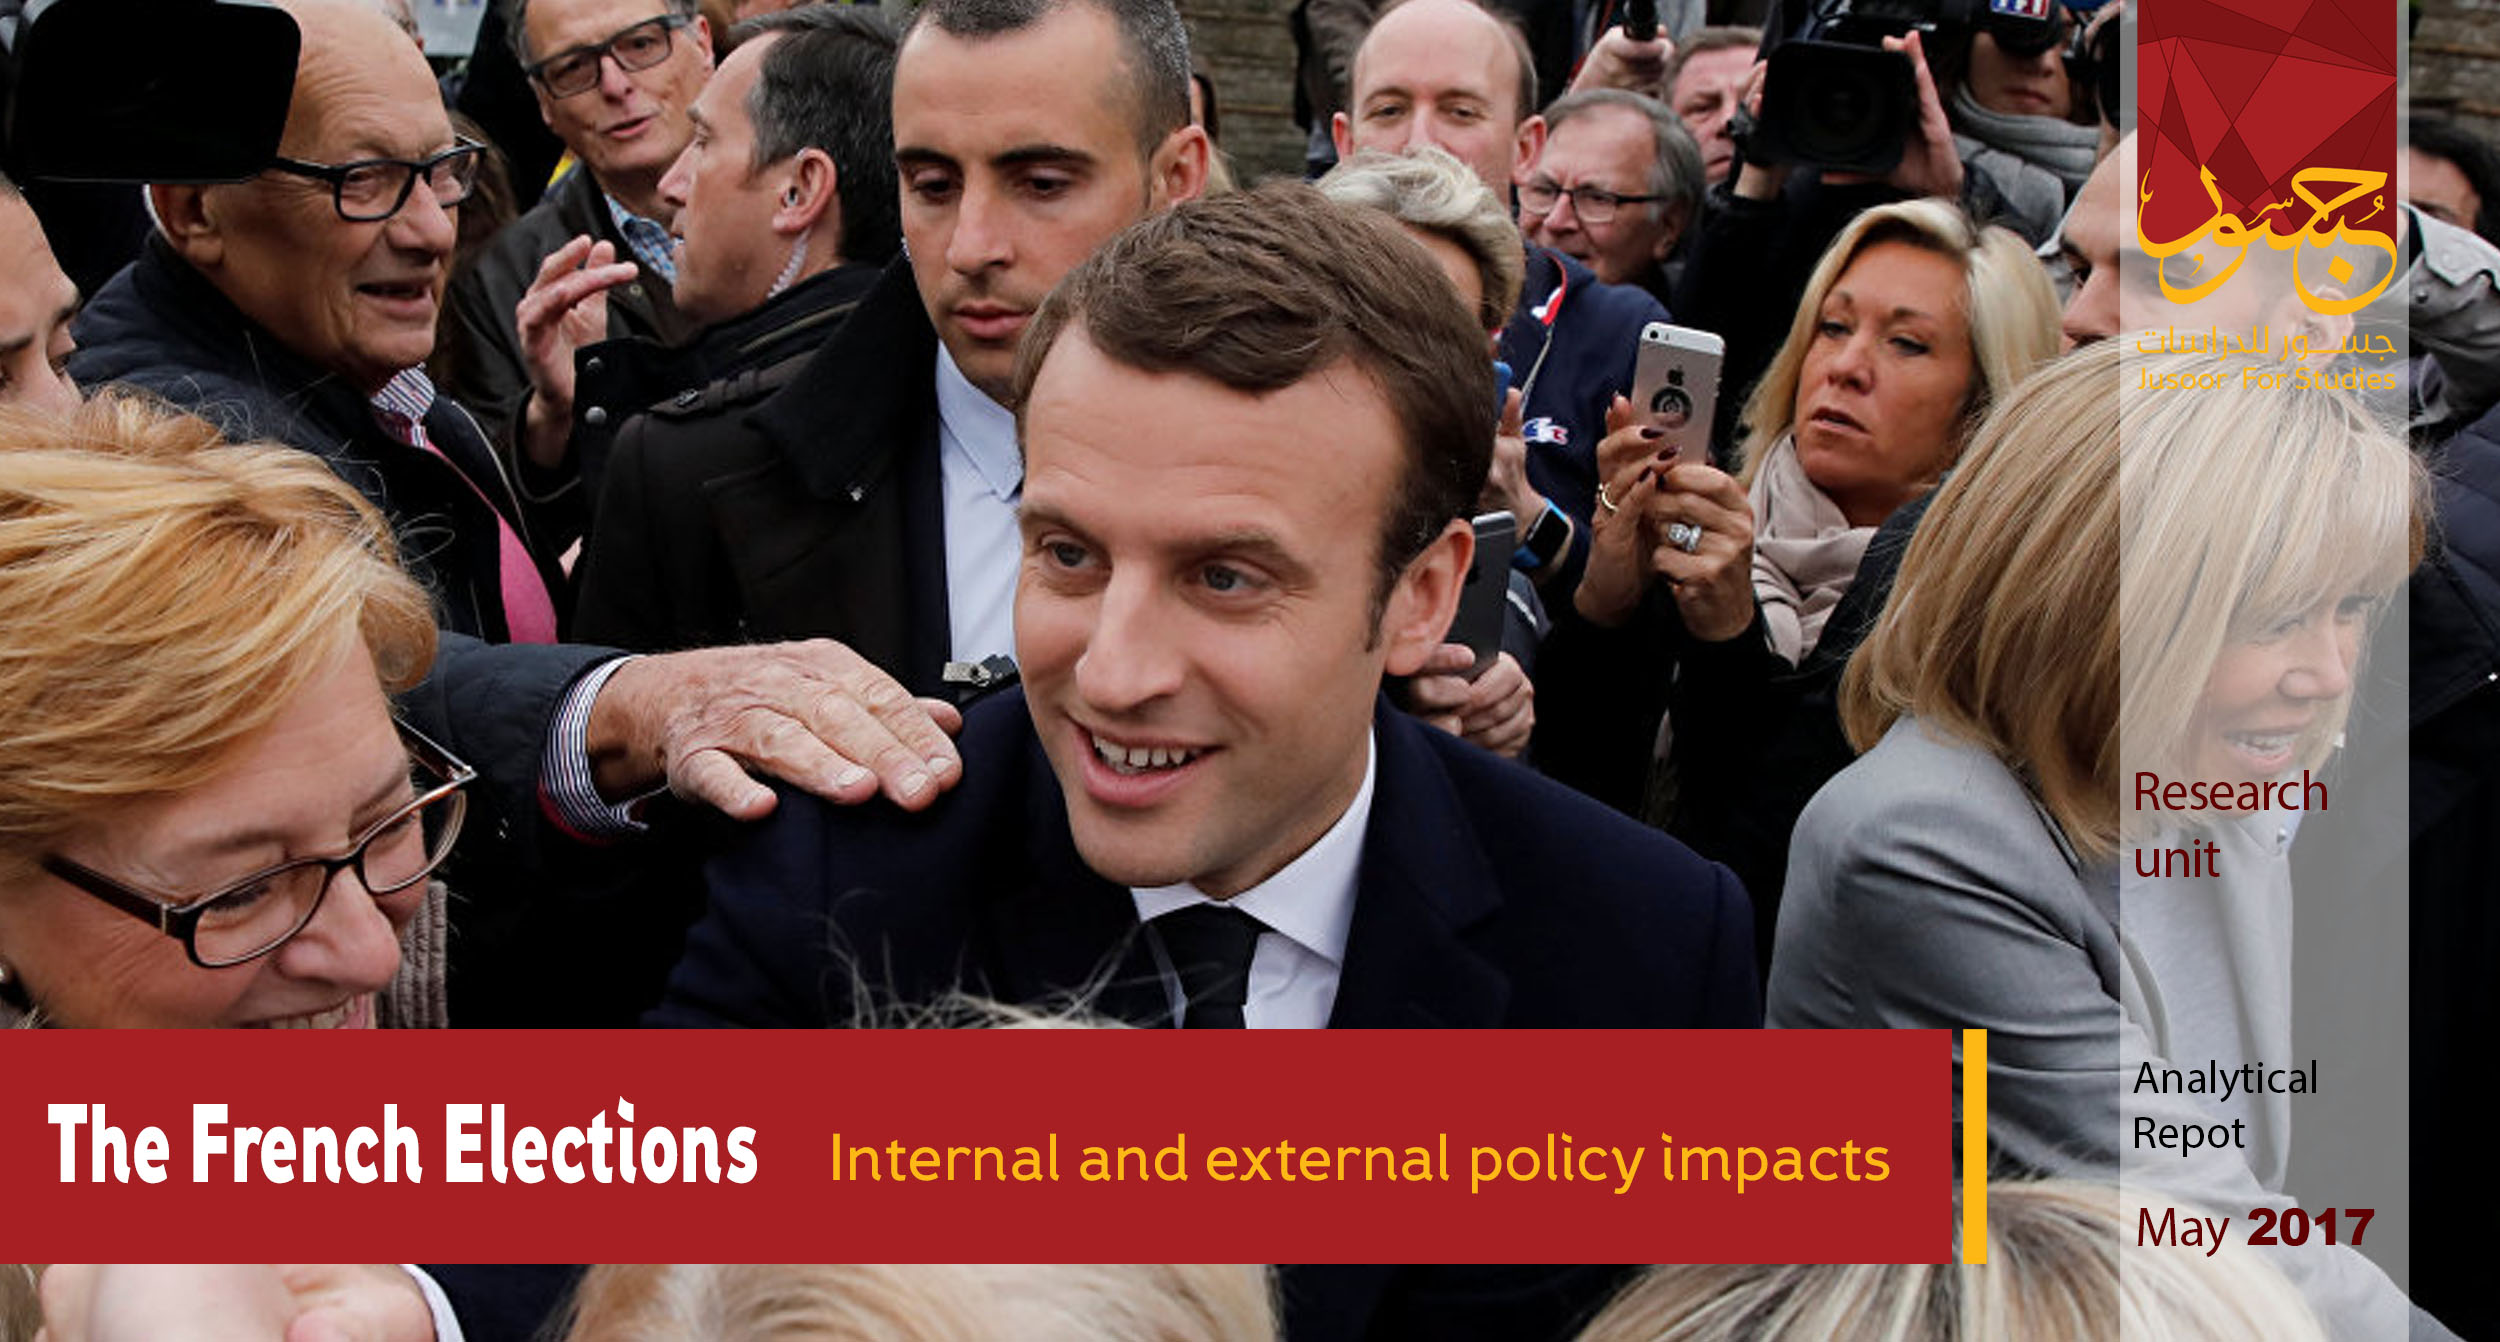 The French Elections Internal and external policy impacts